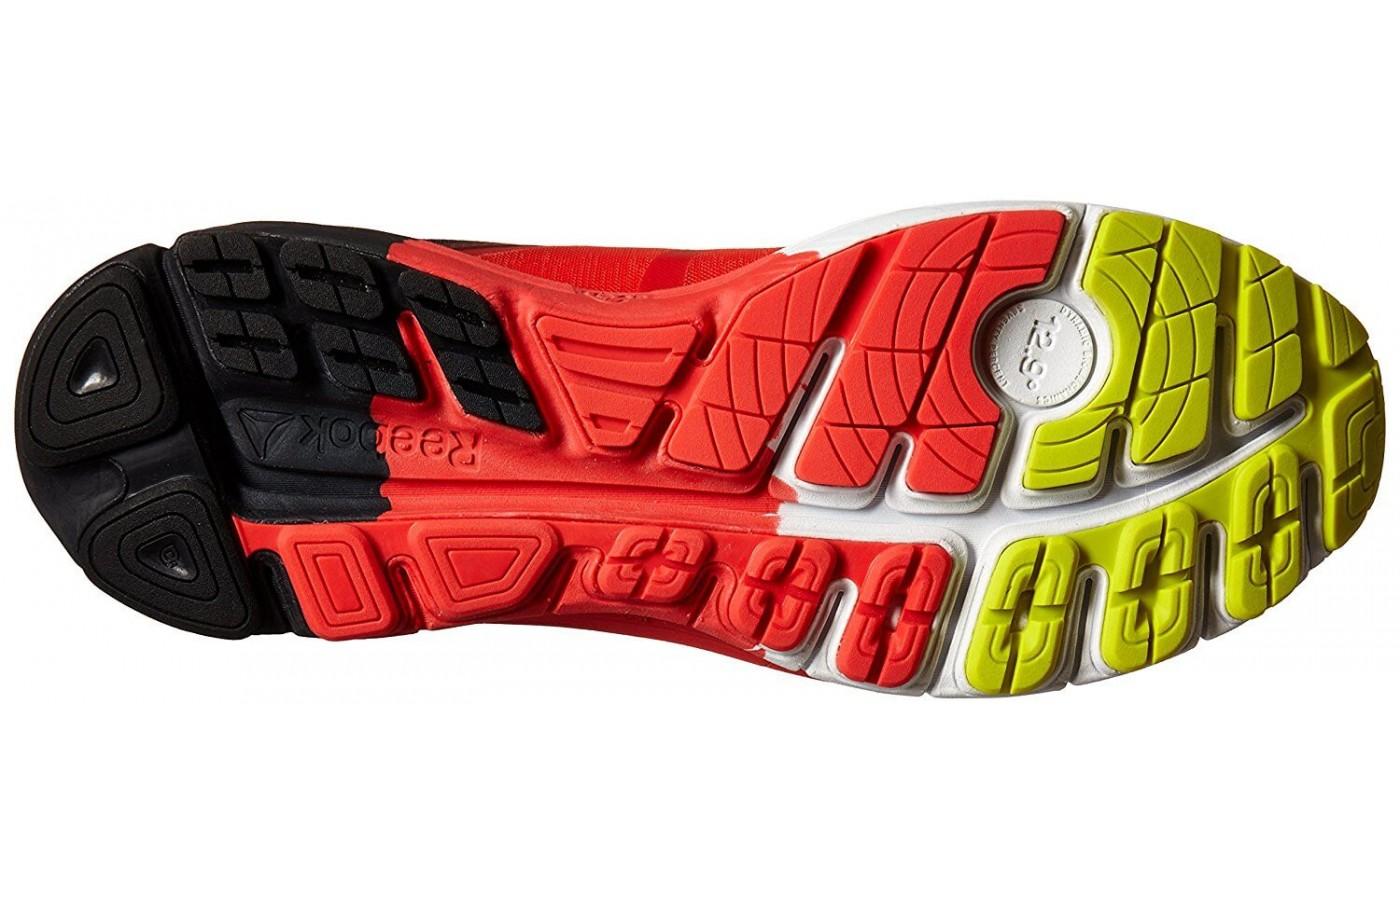 The durable outsole that produces quality traction